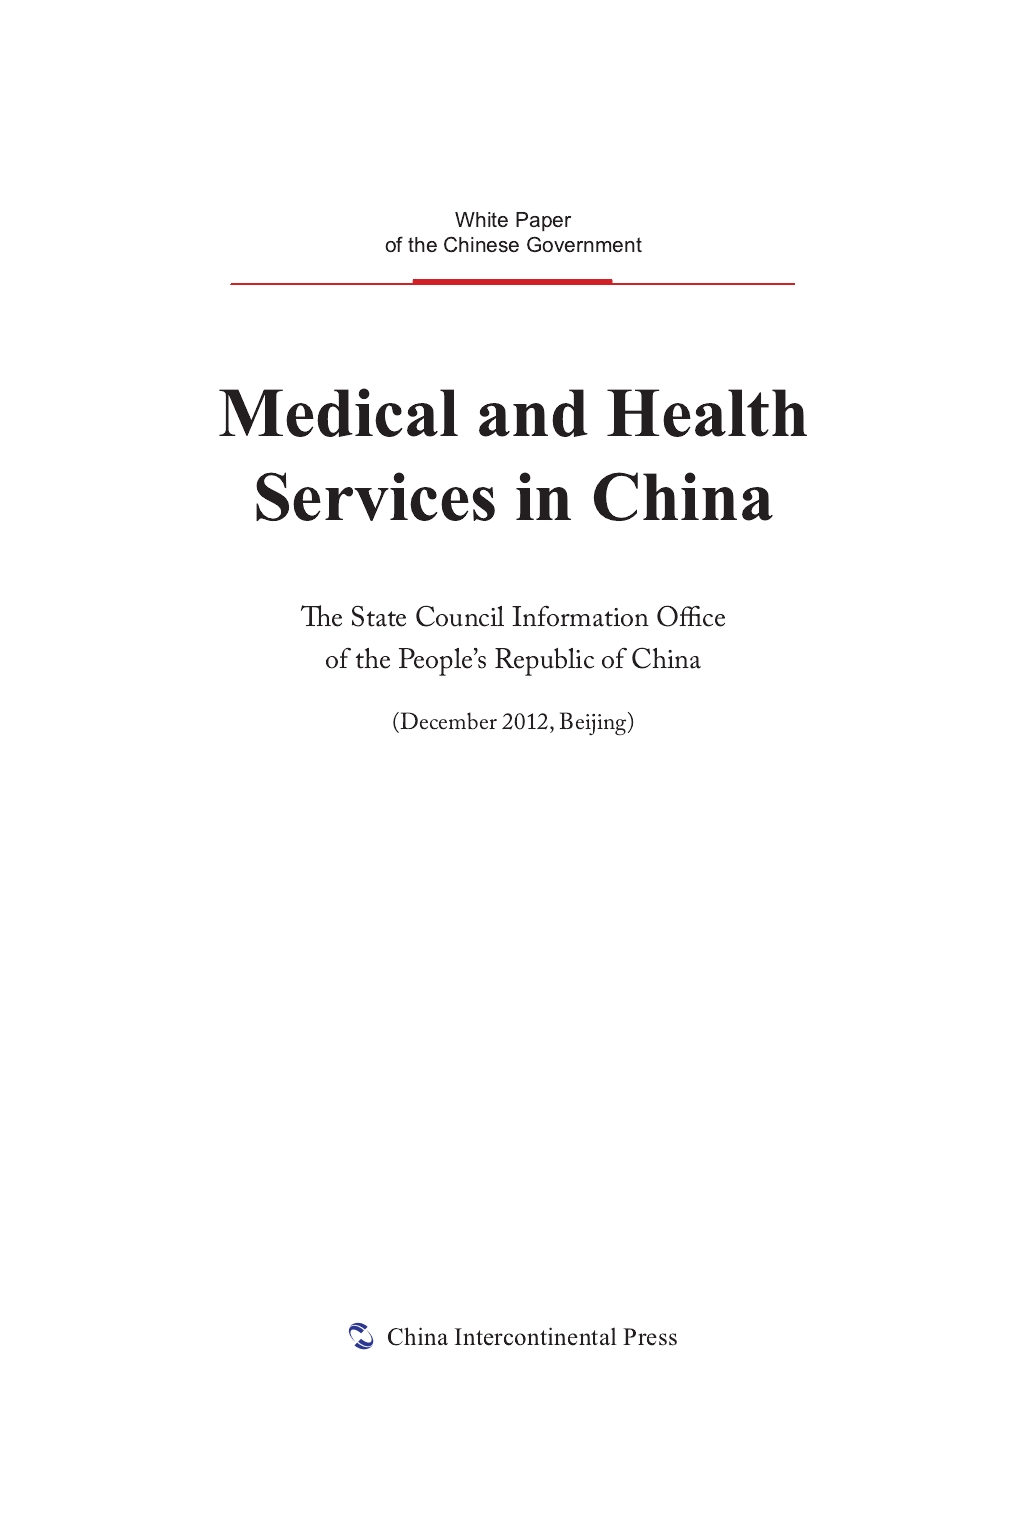 Medical and Health Services in China